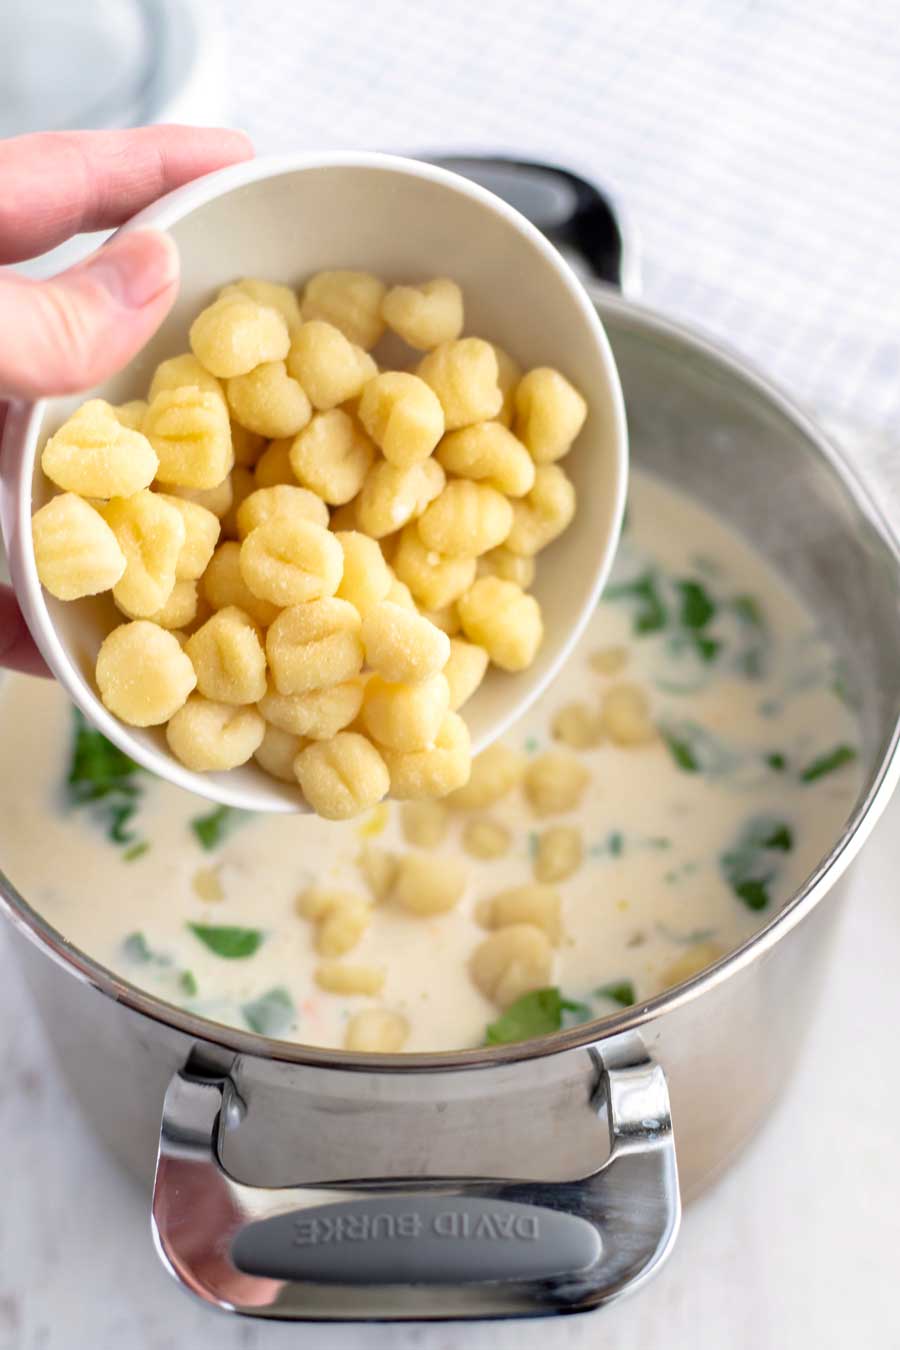 How to Make Chicken Gnocchi Soup Step 5